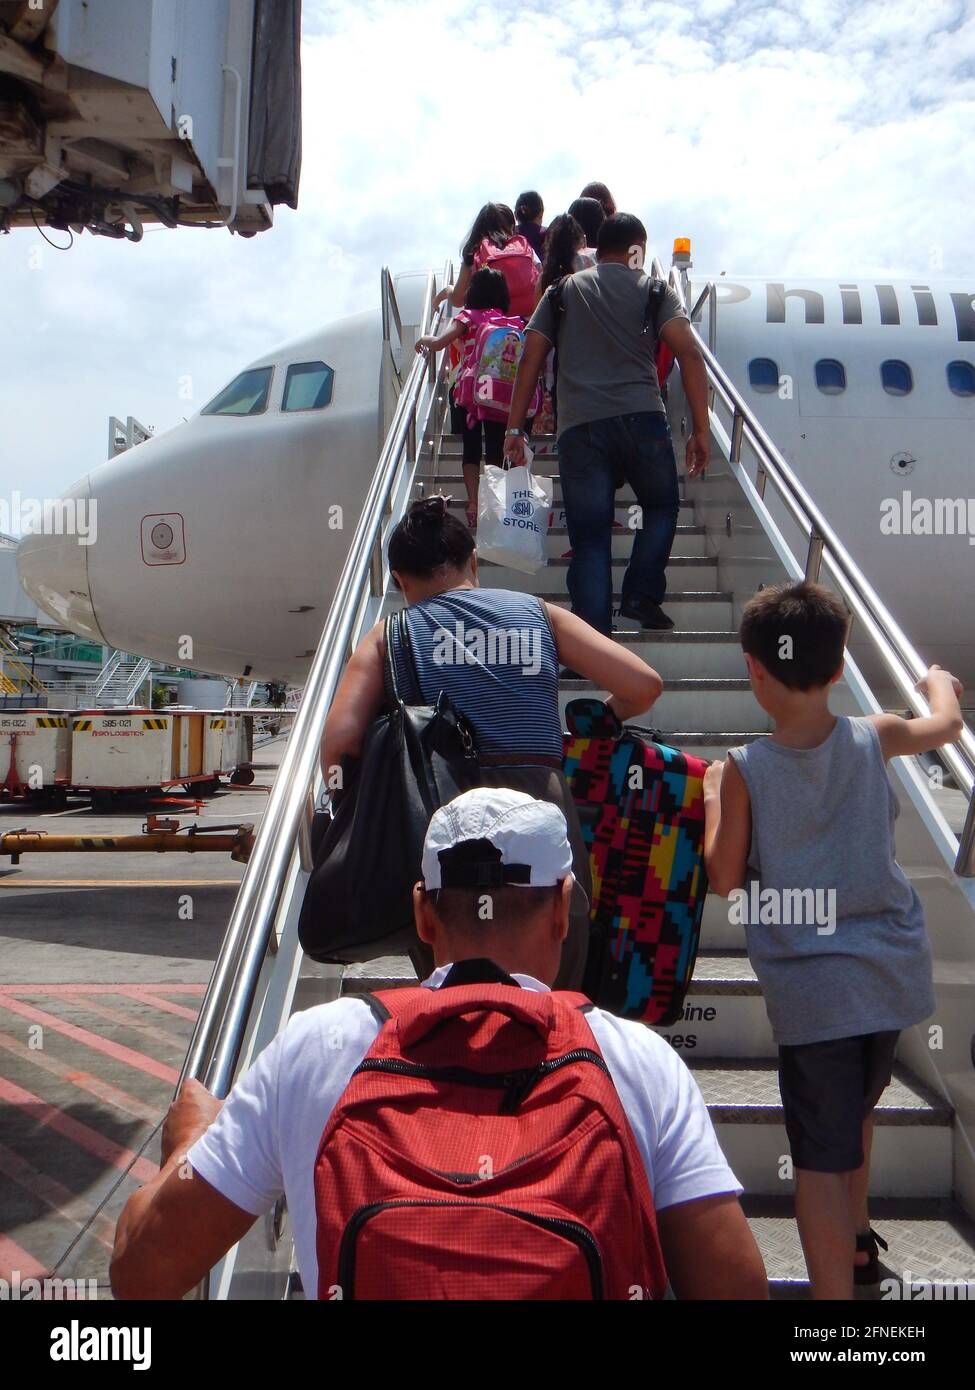 Passengers boarding a jet place in Manila airport Stock Photo